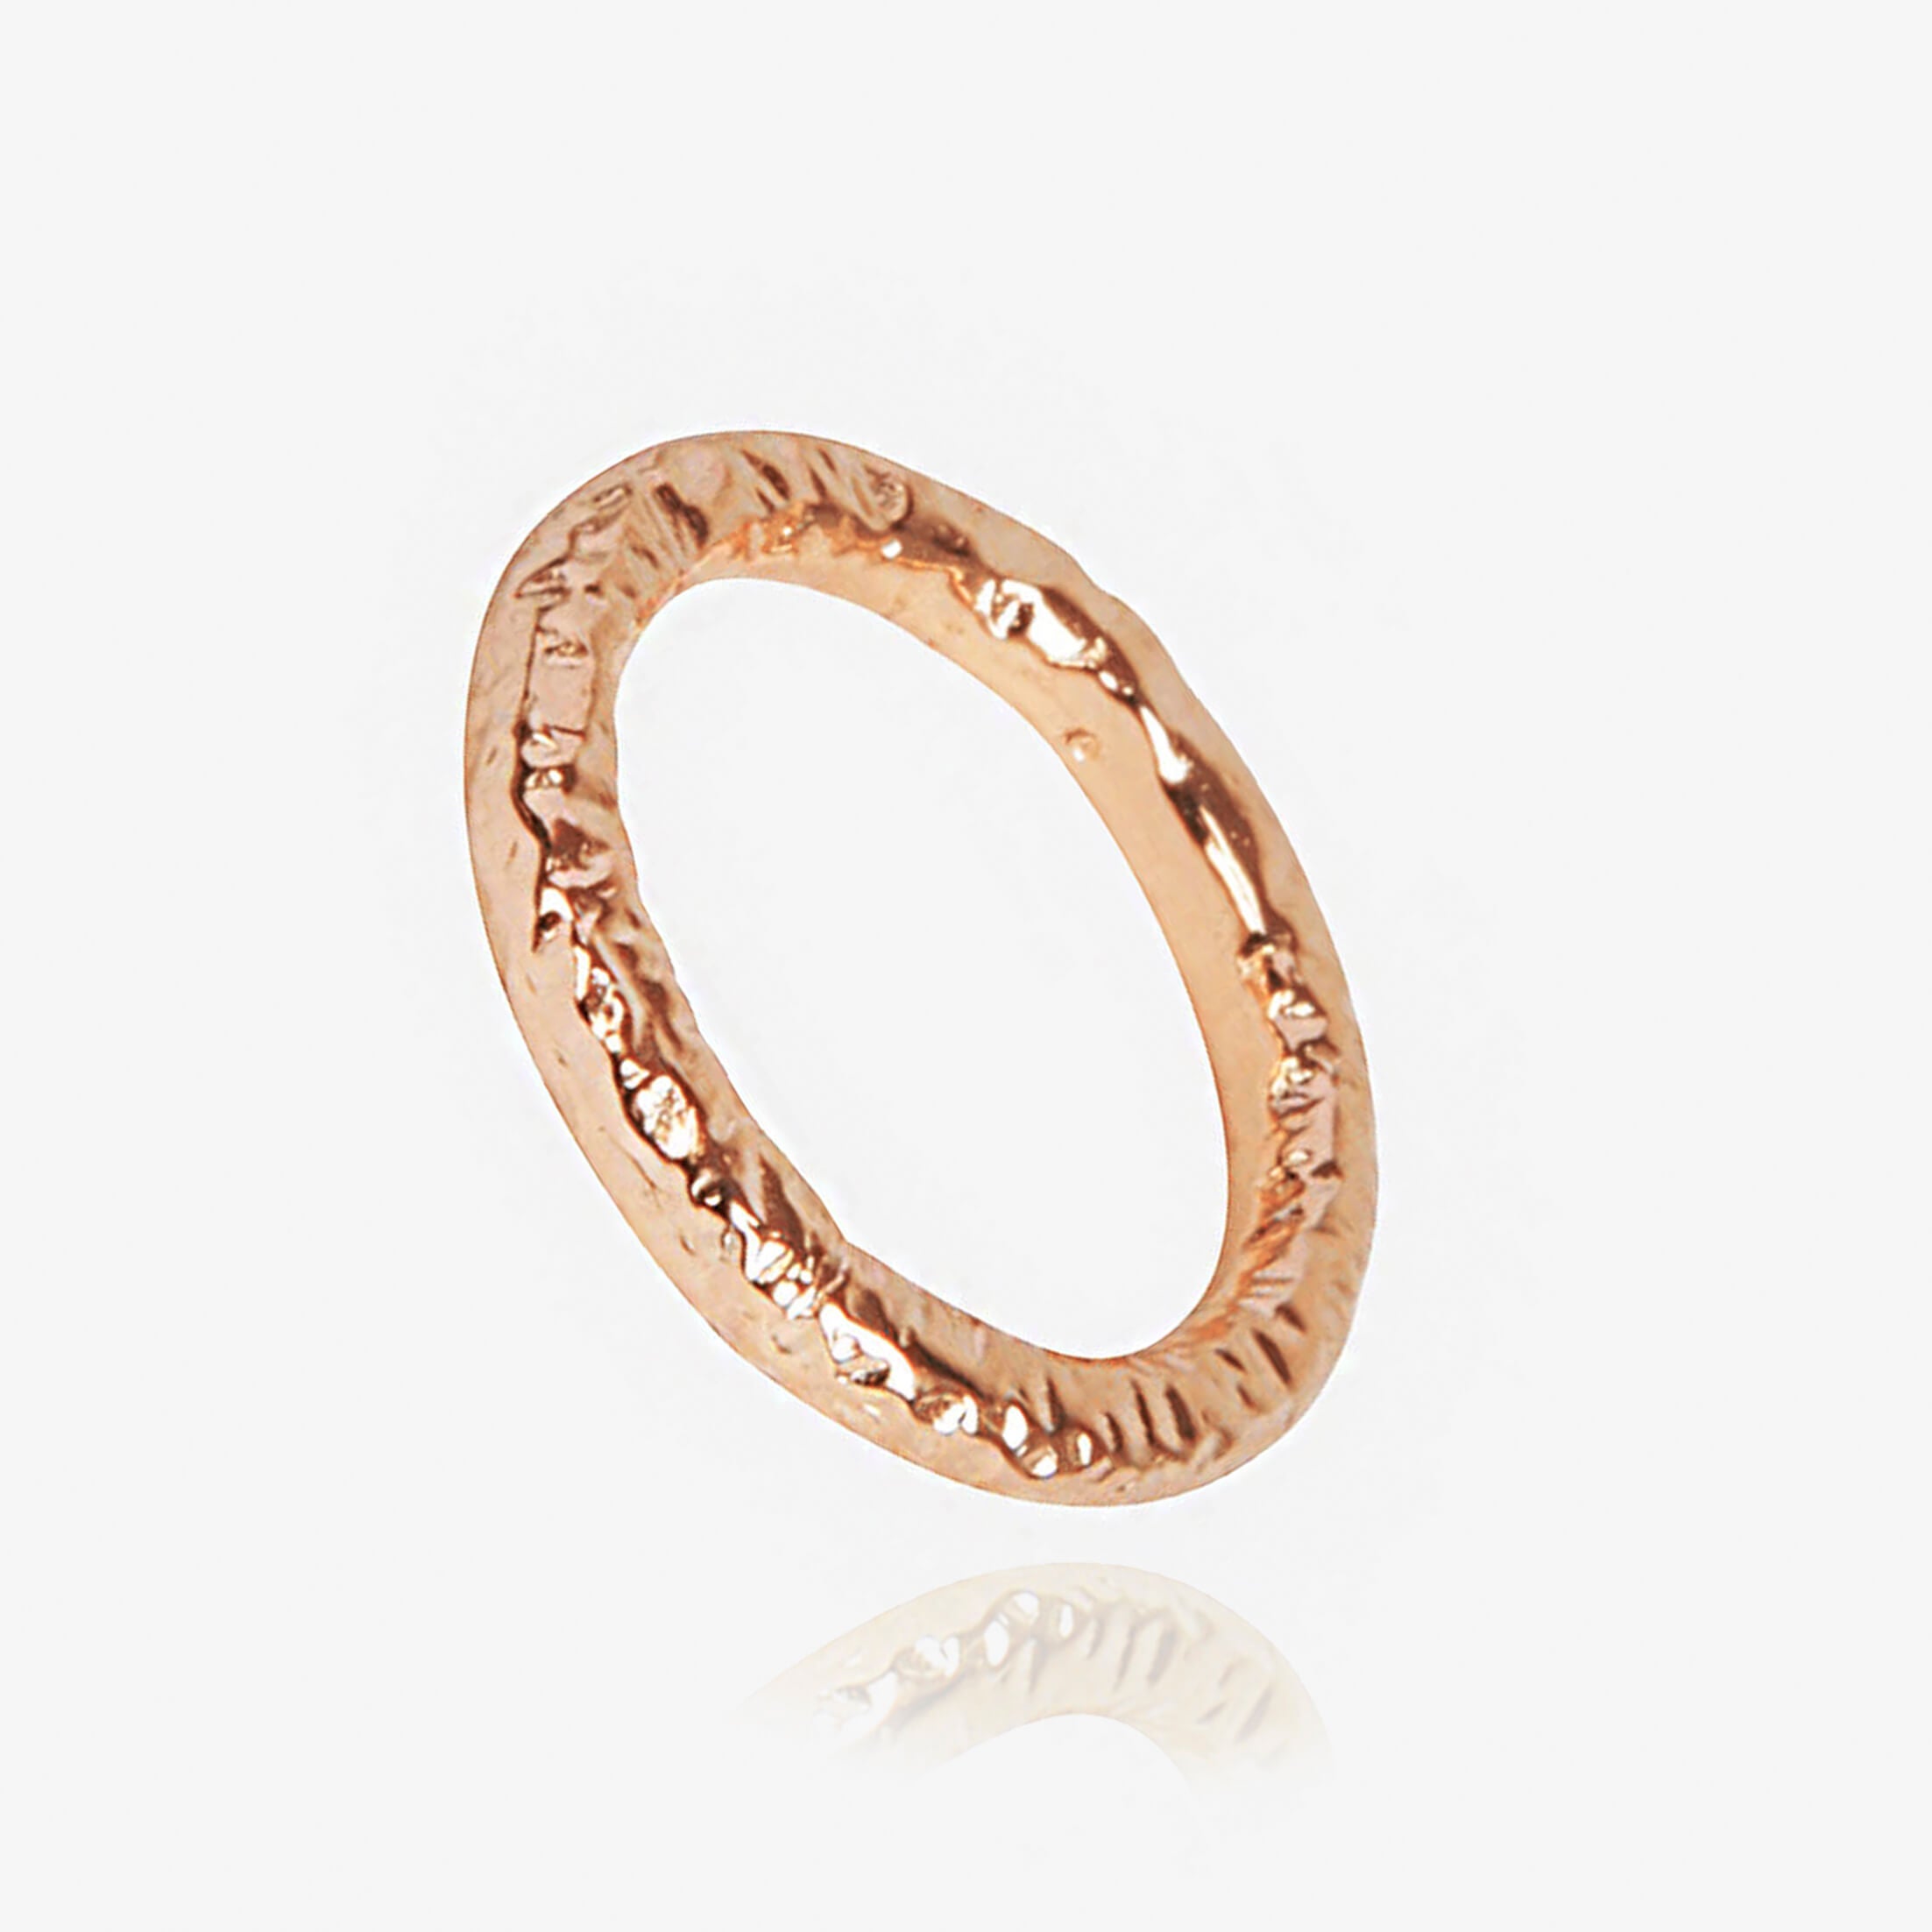 Hand-textured ring in rose gold by Matthew Calvin